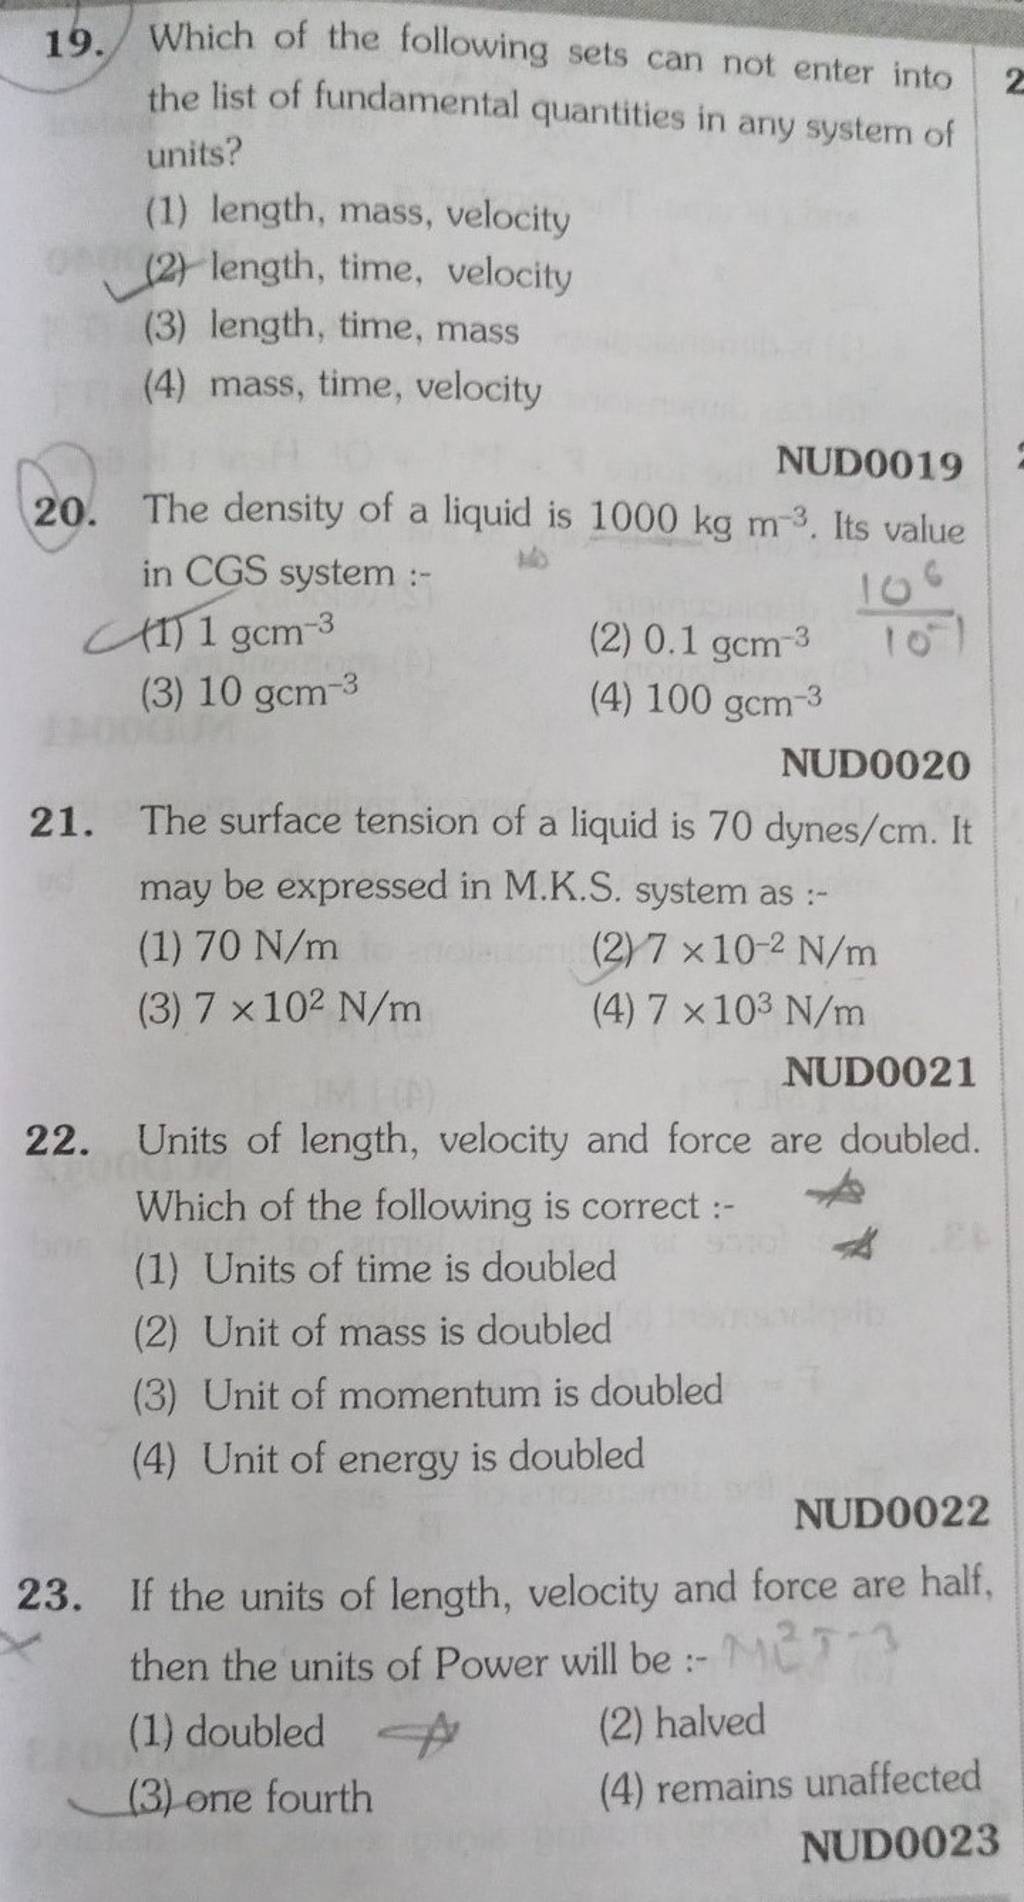 NUDO019 20. The density of a liquid is 1000 kg m−3. Its value in CGS s